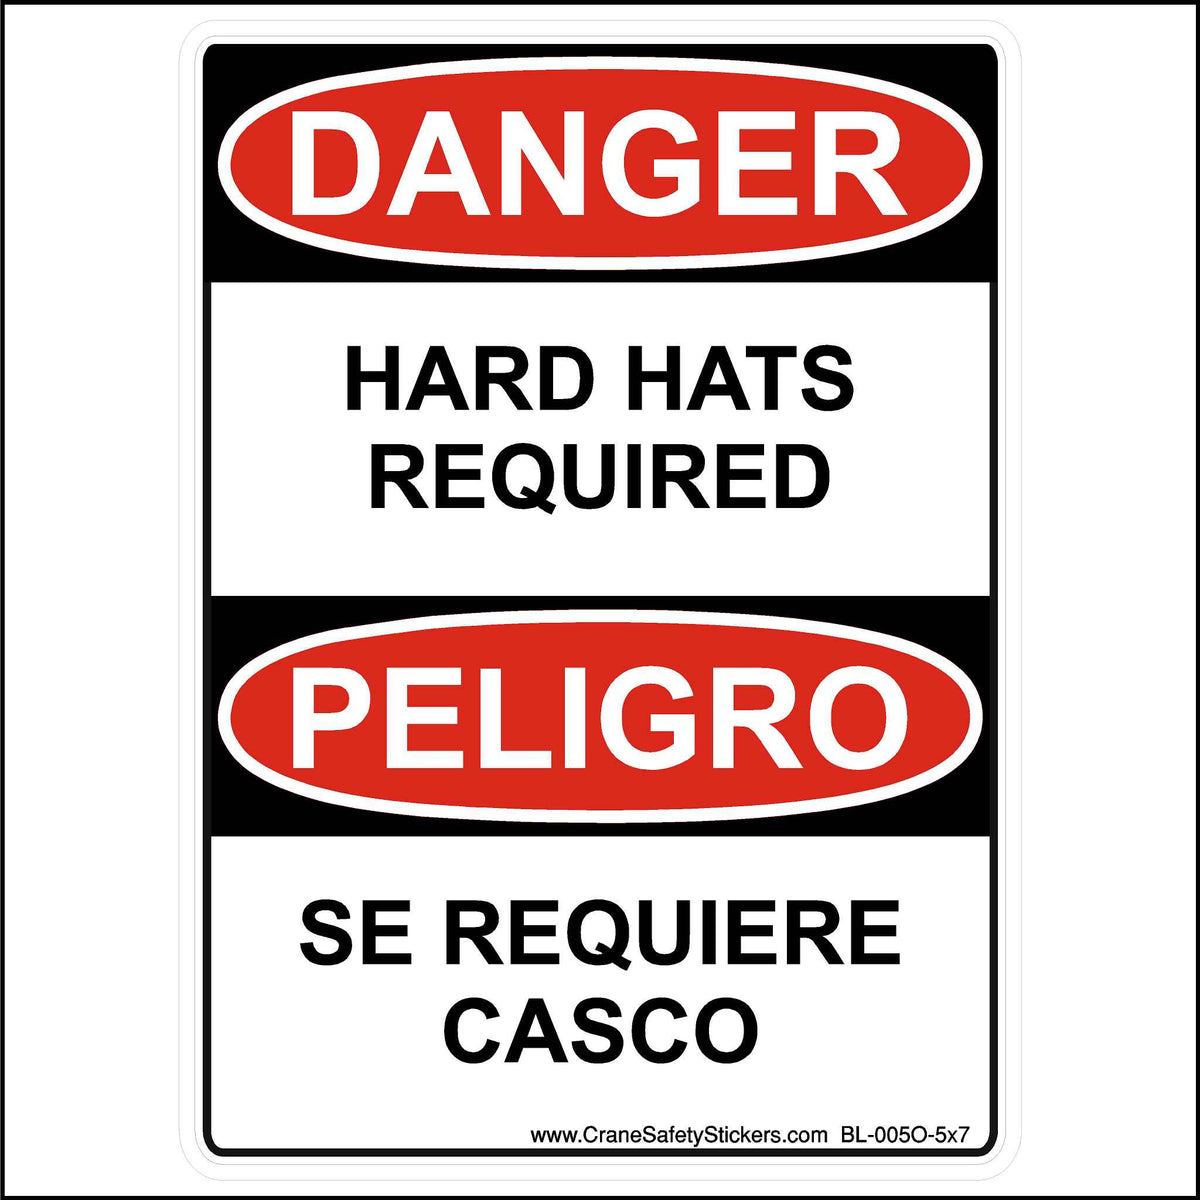 This 5x7 Inch Bilingual English and Spanish Danger Hard Hats Required Sticker Is Printed With. DANGER Hard Hats Required. PELIGRO SE REQUIERE CASCO.